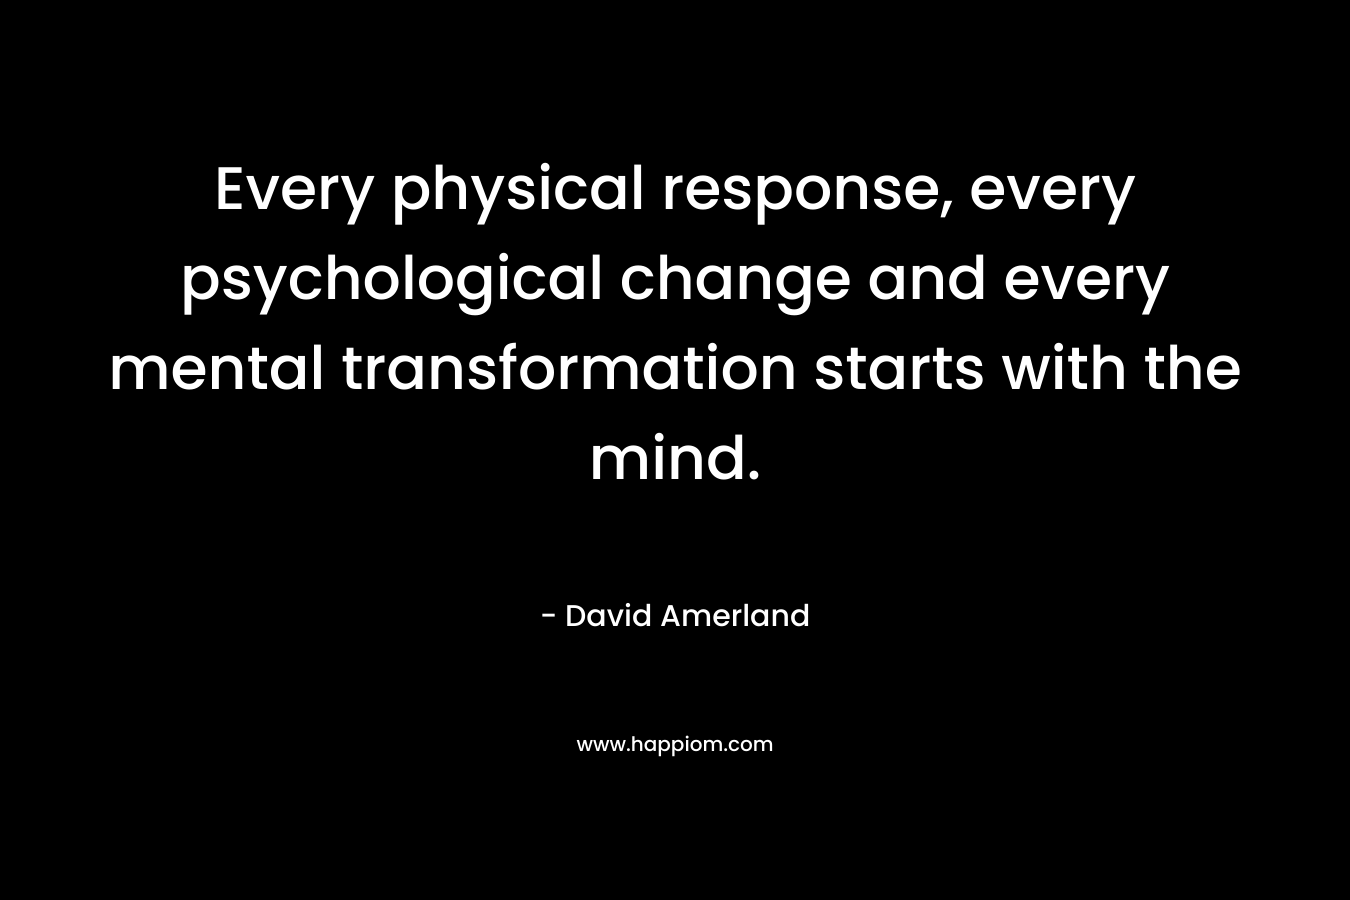 Every physical response, every psychological change and every mental transformation starts with the mind.